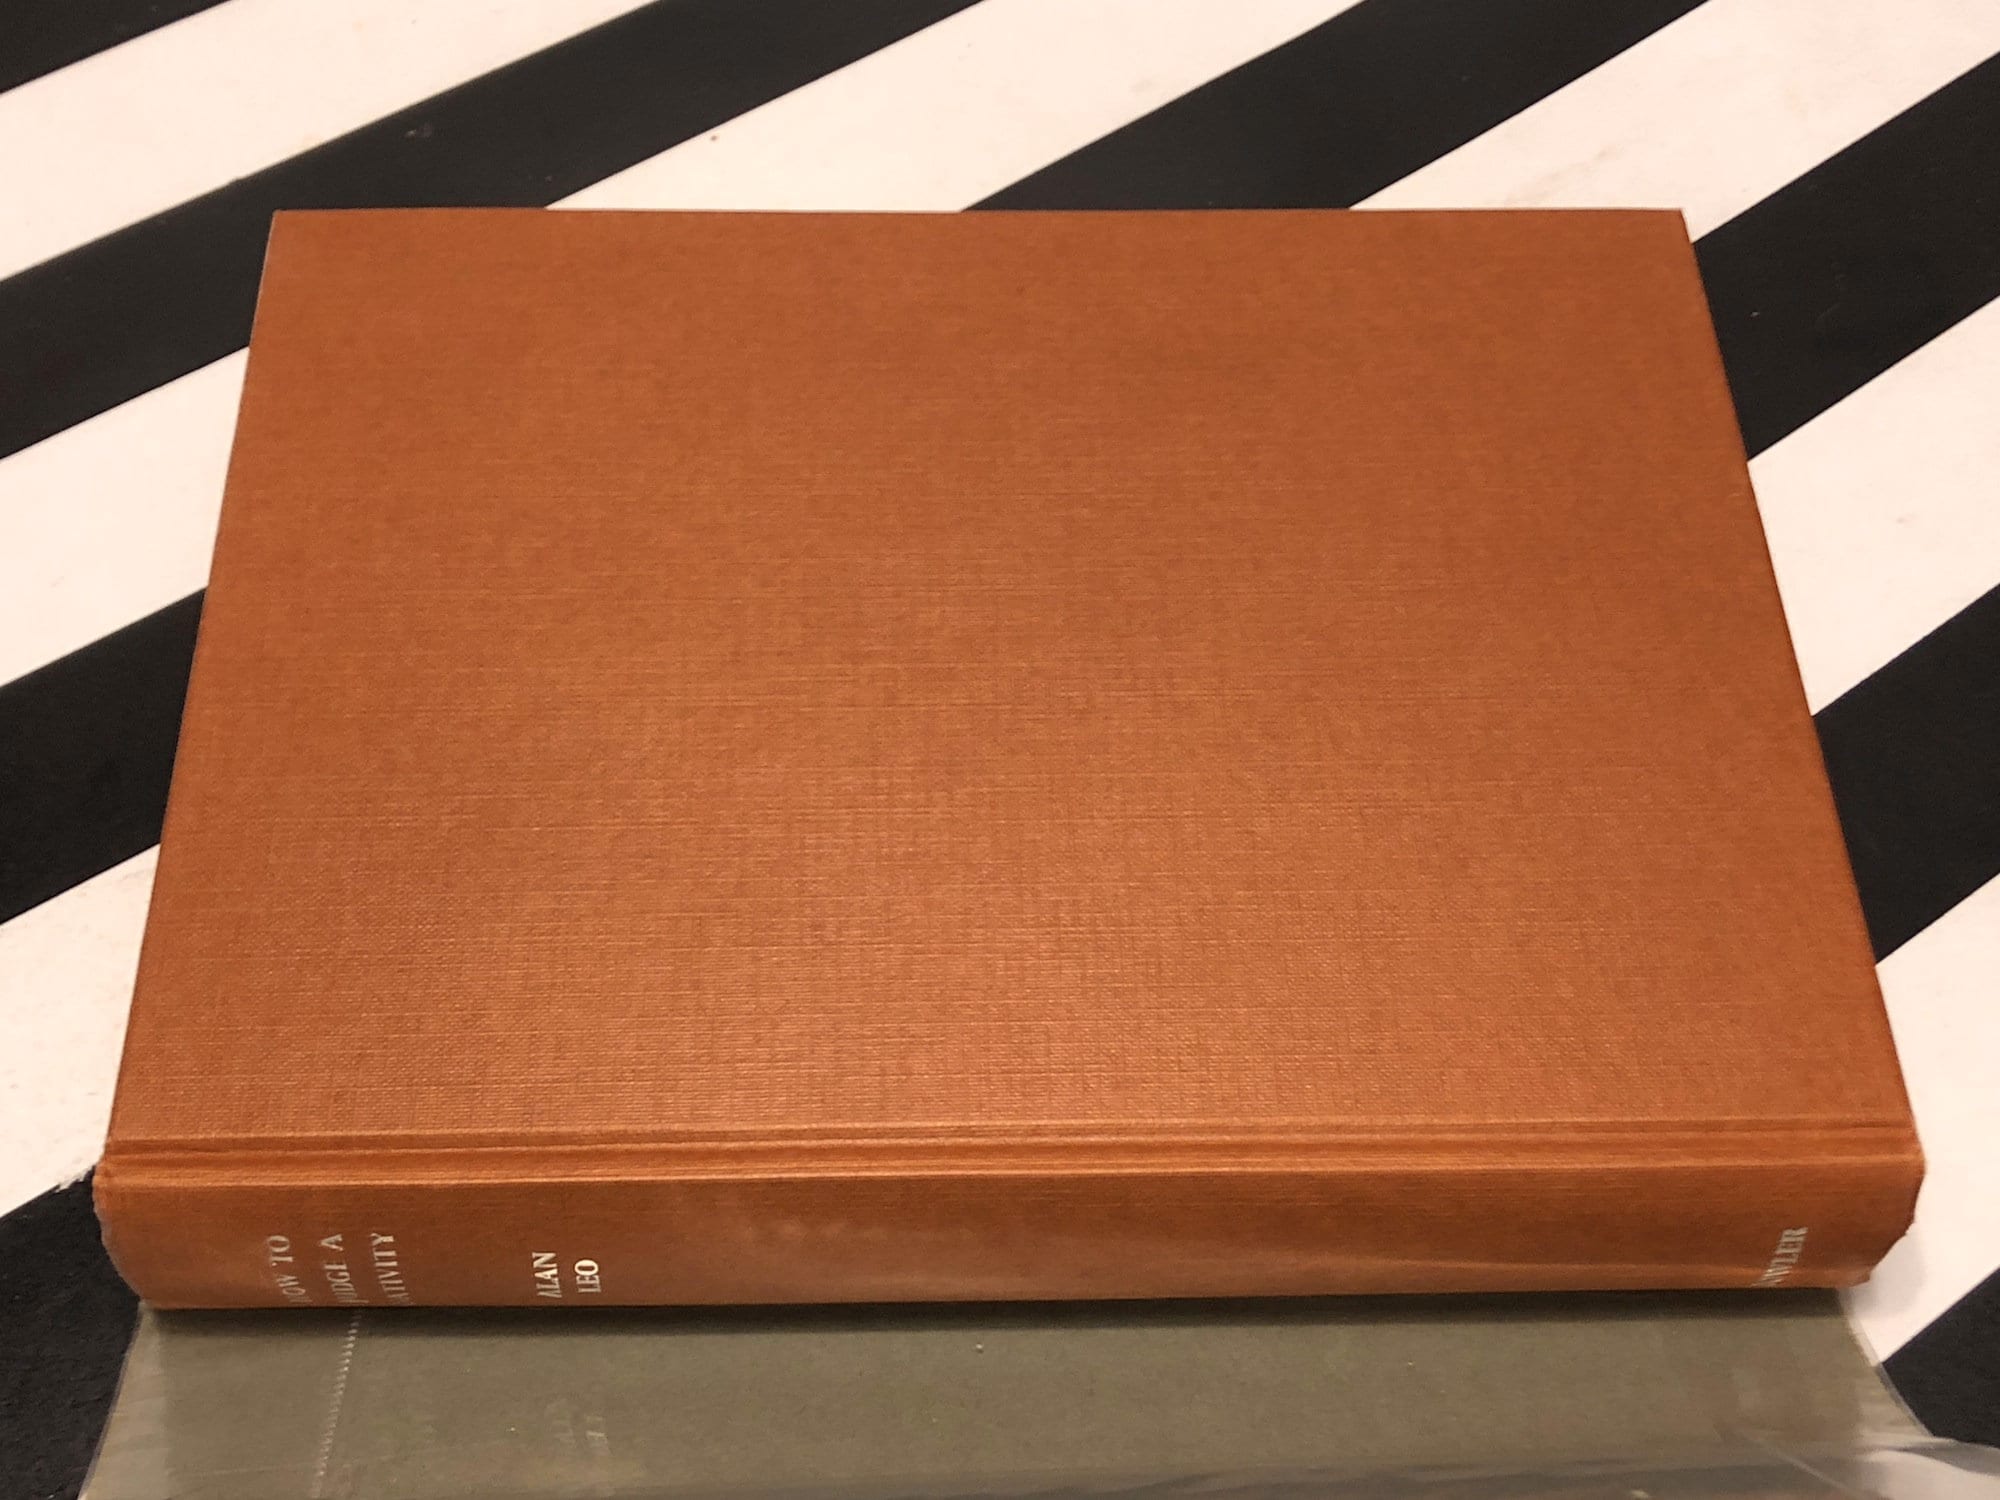 How to Judge a Nativity by Alan Leo (1969) hardcover book